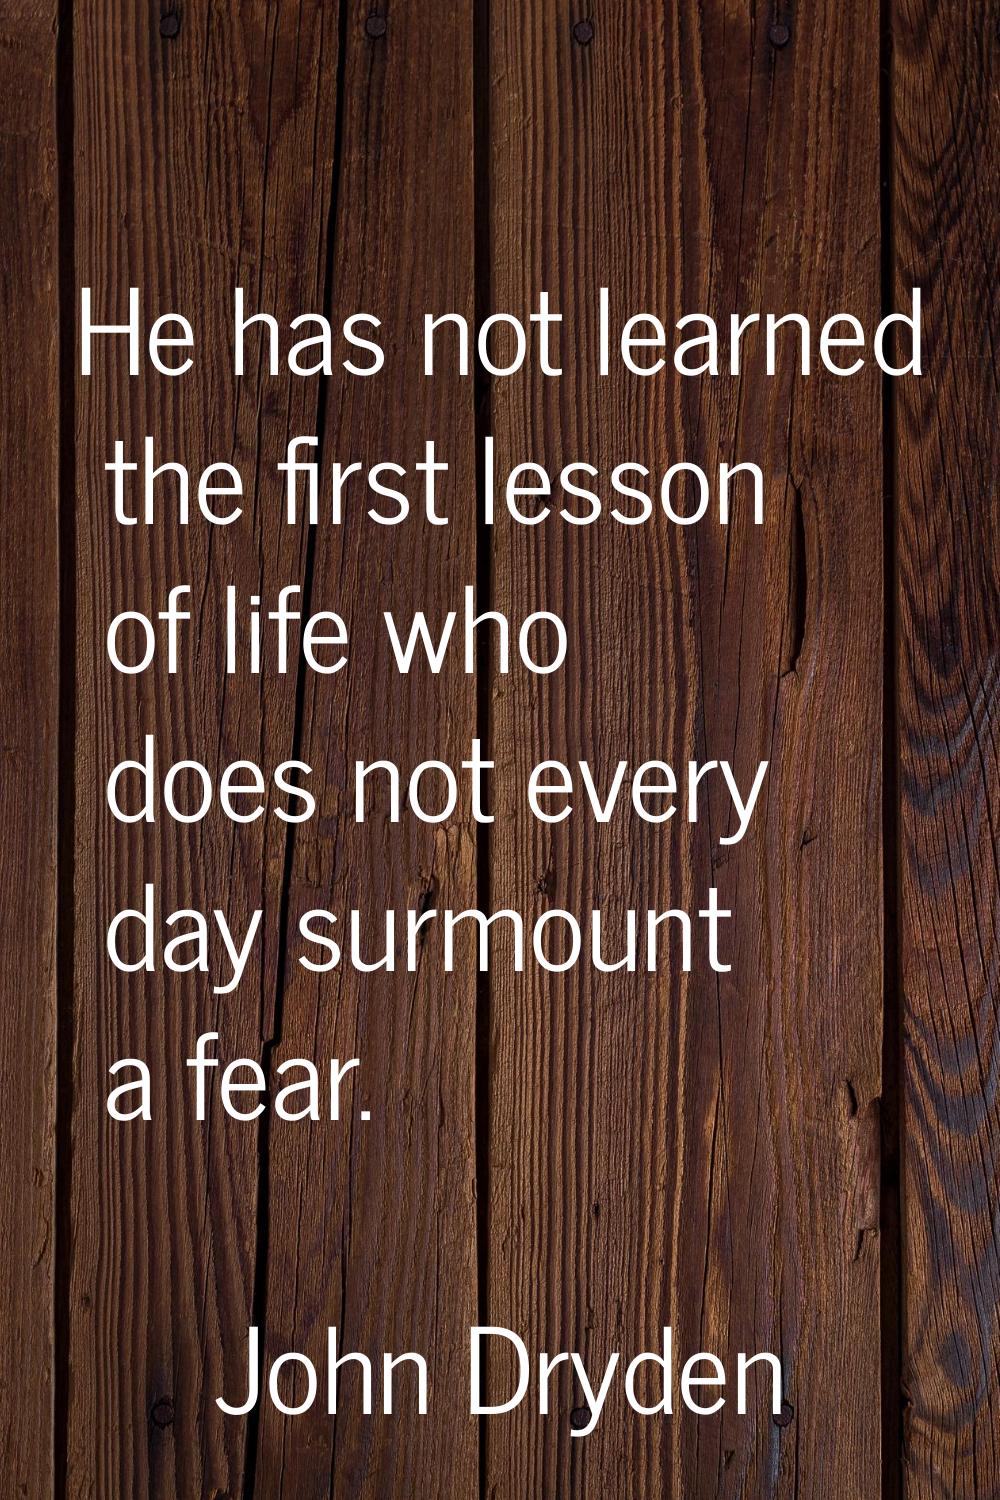 He has not learned the first lesson of life who does not every day surmount a fear.